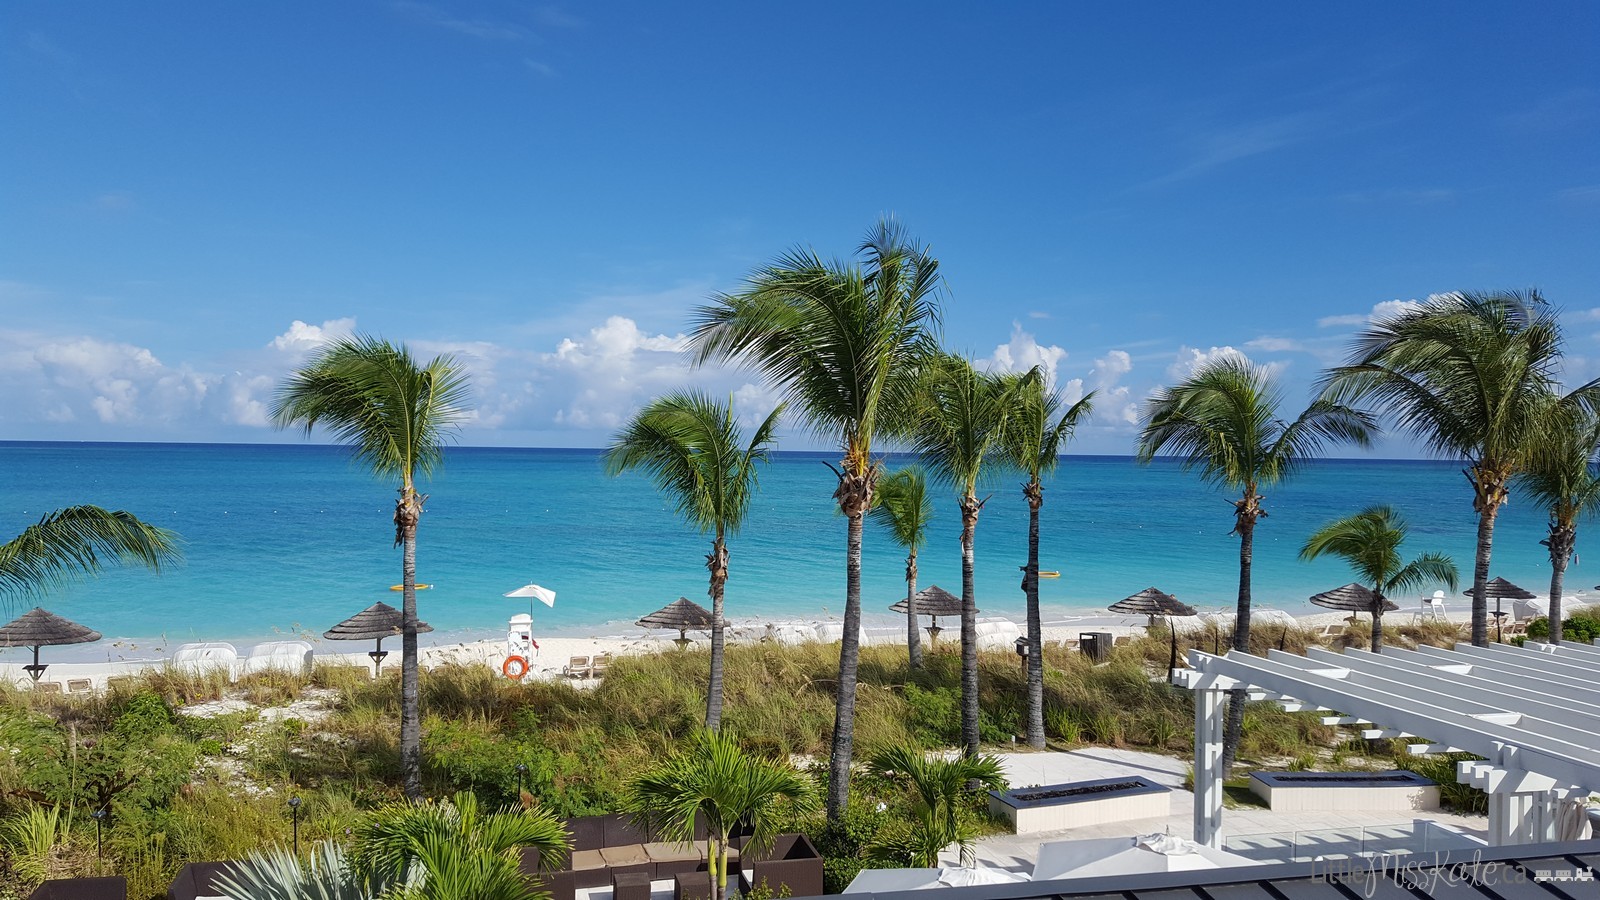 Beaches Turks & Caicos Resort Villages & Spa Review